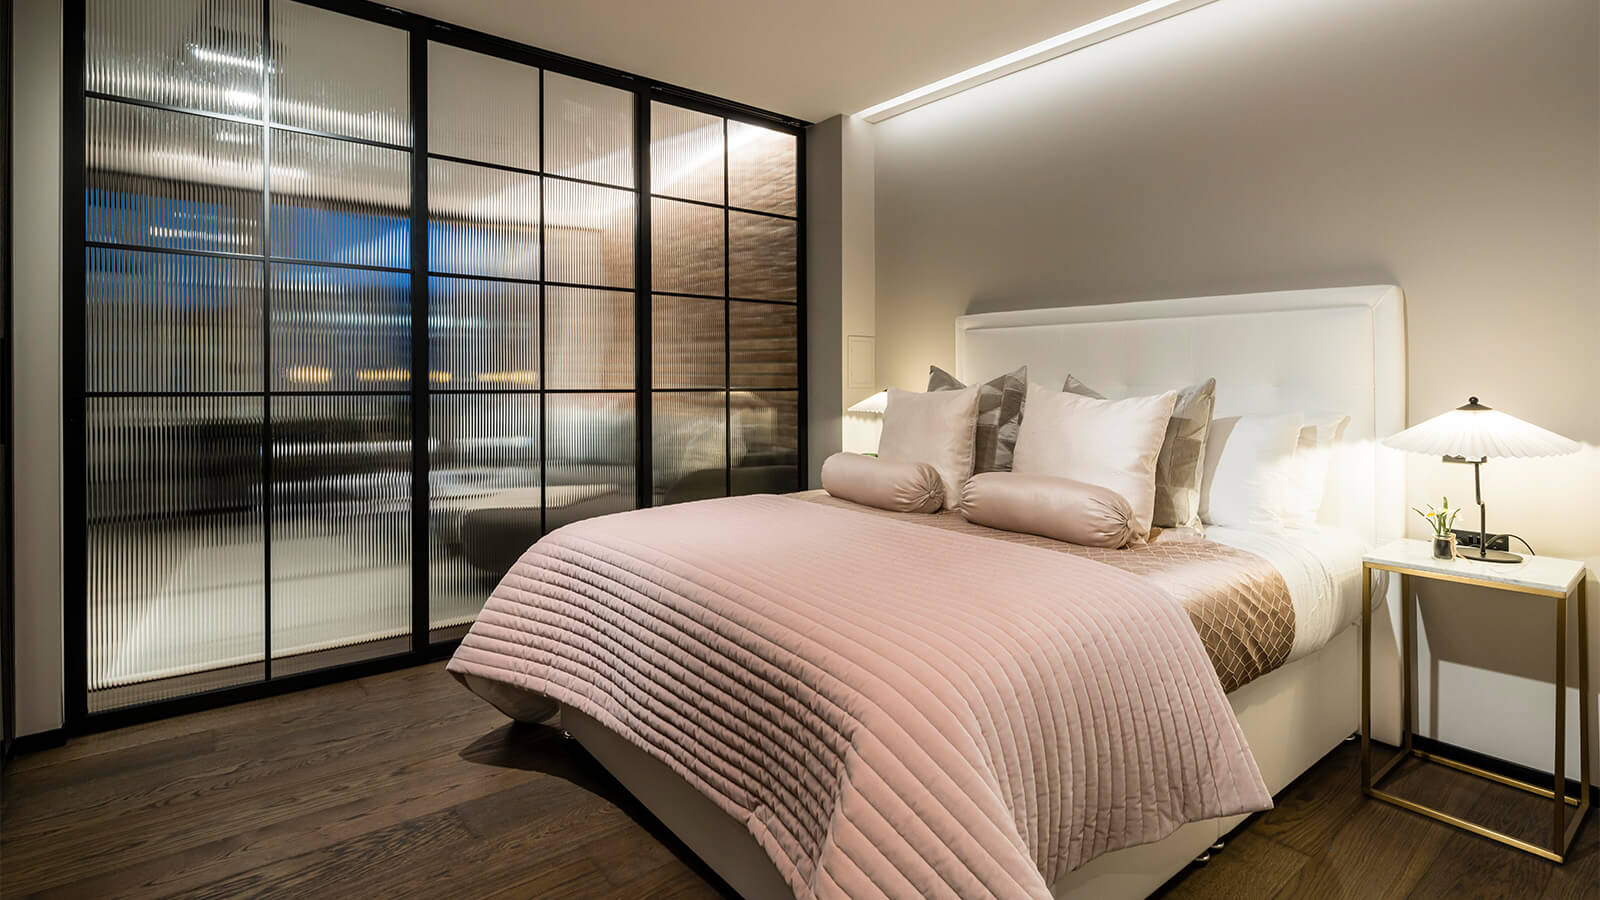 Bedroom at Apartment 210 The Stage, ©Galliard Homes.